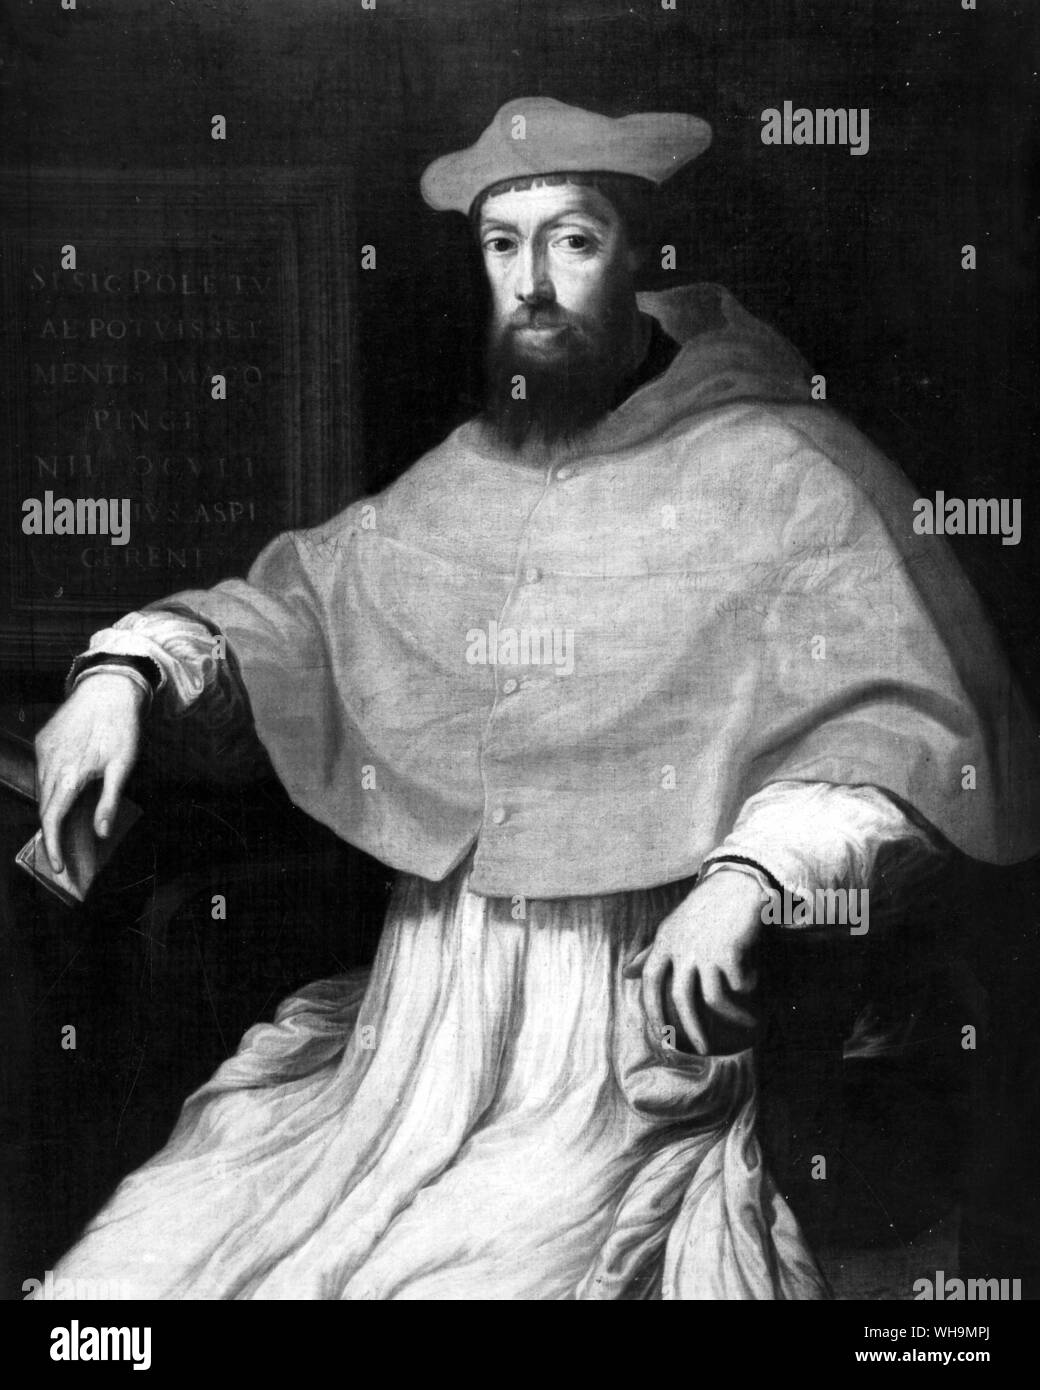 Cardinal Pole, Lambeth Palace. Reginald Pole (1500-58), Cardinal from 1536 who returned from Rome as papal legate on the accession of Mary I in order to readmit England to the Catholic Church. He succeeded Cranmer as Archbishop of Canterbury in 1556. Stock Photo